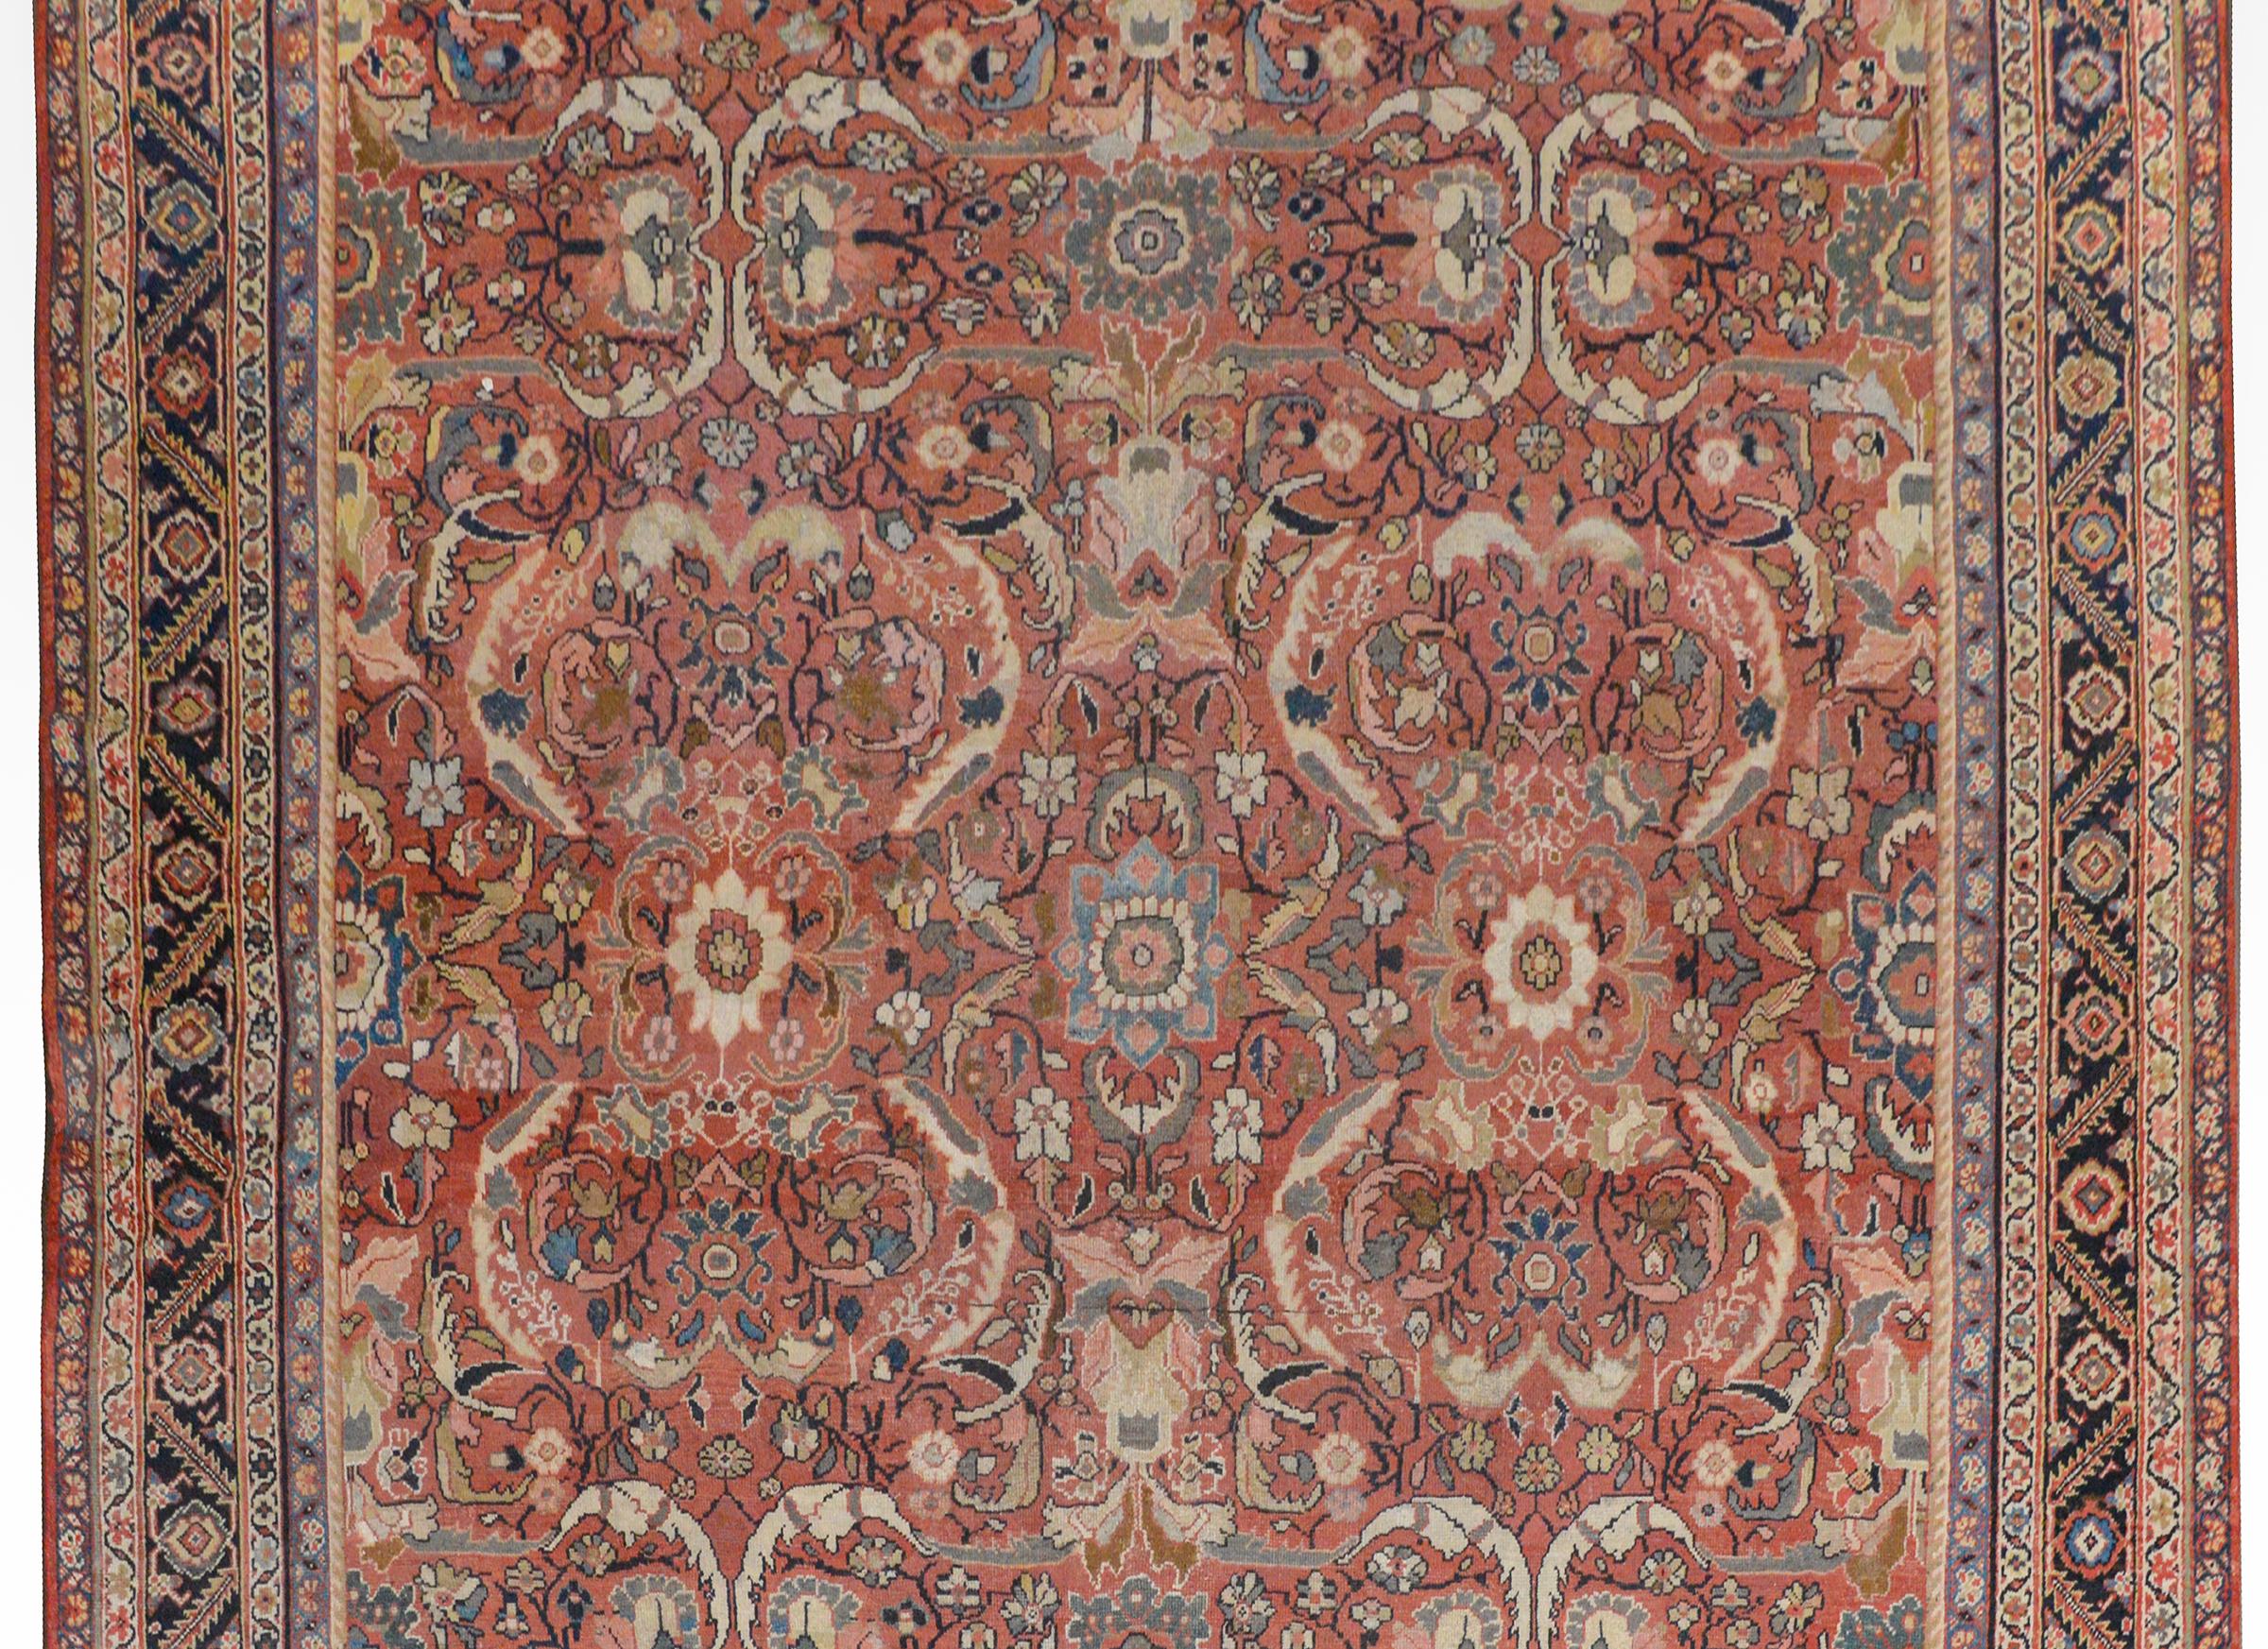 A bold early 20th century Persian Mahal rug with a large-scale mirrored floral and scrolling vine pattern woven in light and dark indigo, cream, pink, and brown colored vegetable dyed wool on a dark crimson background. The border is wonderful with a